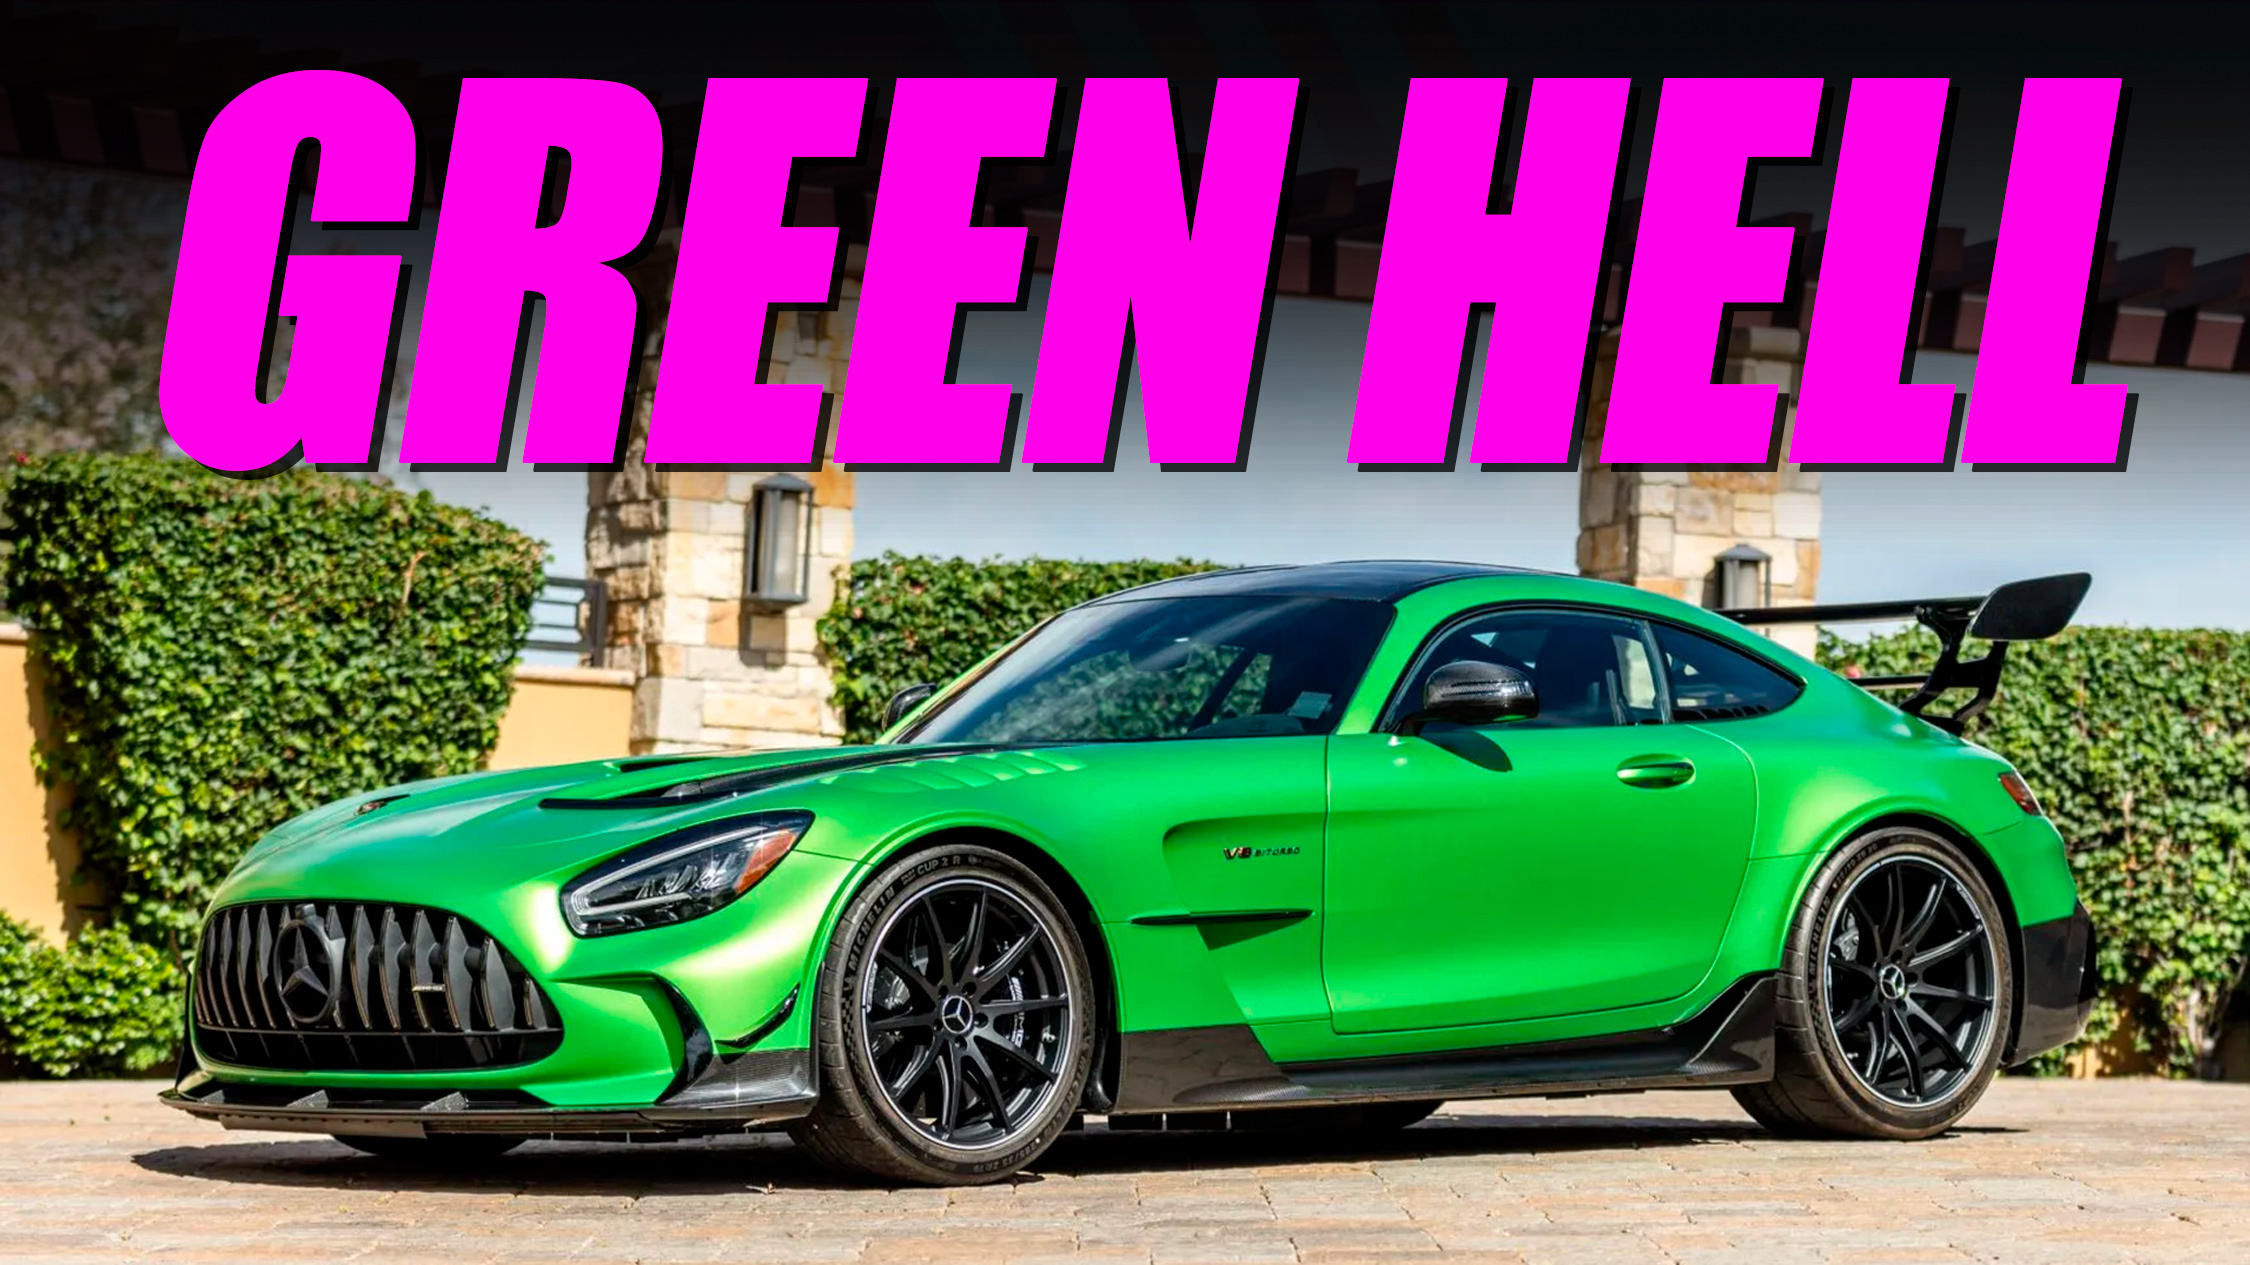 The low-mileage Mercedes-AMG GT Black Series is a nasty green beast